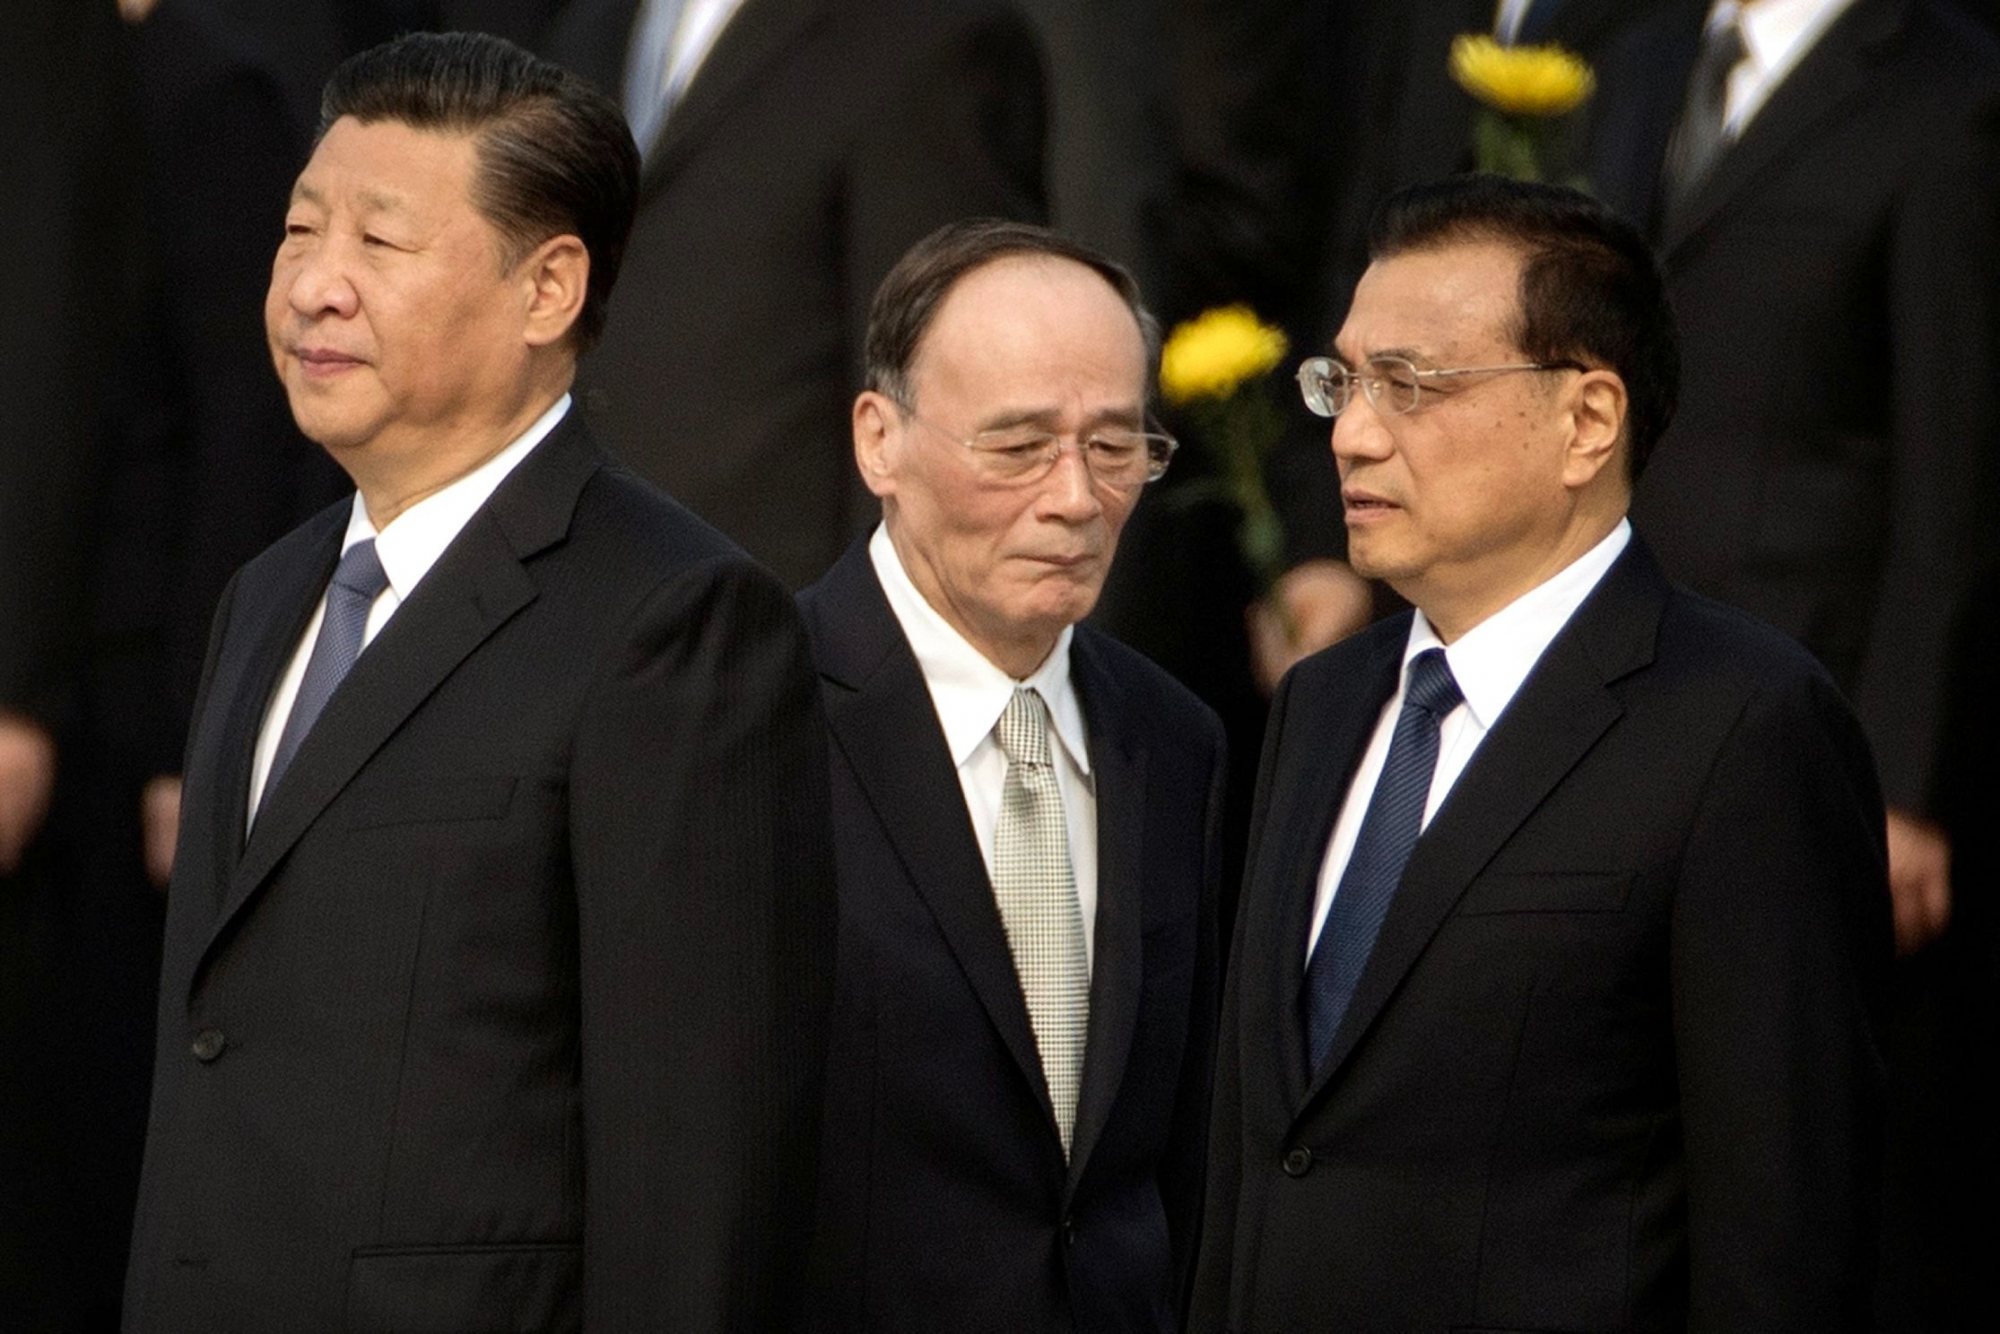 FILE - In this Sept. 30, 2017 file photo, Chinese President Xi Jinping, left, Politburo Standing Committee member Wang Qishan, center, and Chinese Premier Li Keqiang attend a ceremony marking Martyrs' Day at Tiananmen Square in Beijing. Having bested his rivals, Chinese President Xi is primed to consolidate his already considerable power as the countryÄôs ruling Communist Party begins its twice-a-decade national congress on Wednesday, Oct. 18. (AP Photo/Mark Schiefelbein, File) China Party Congress